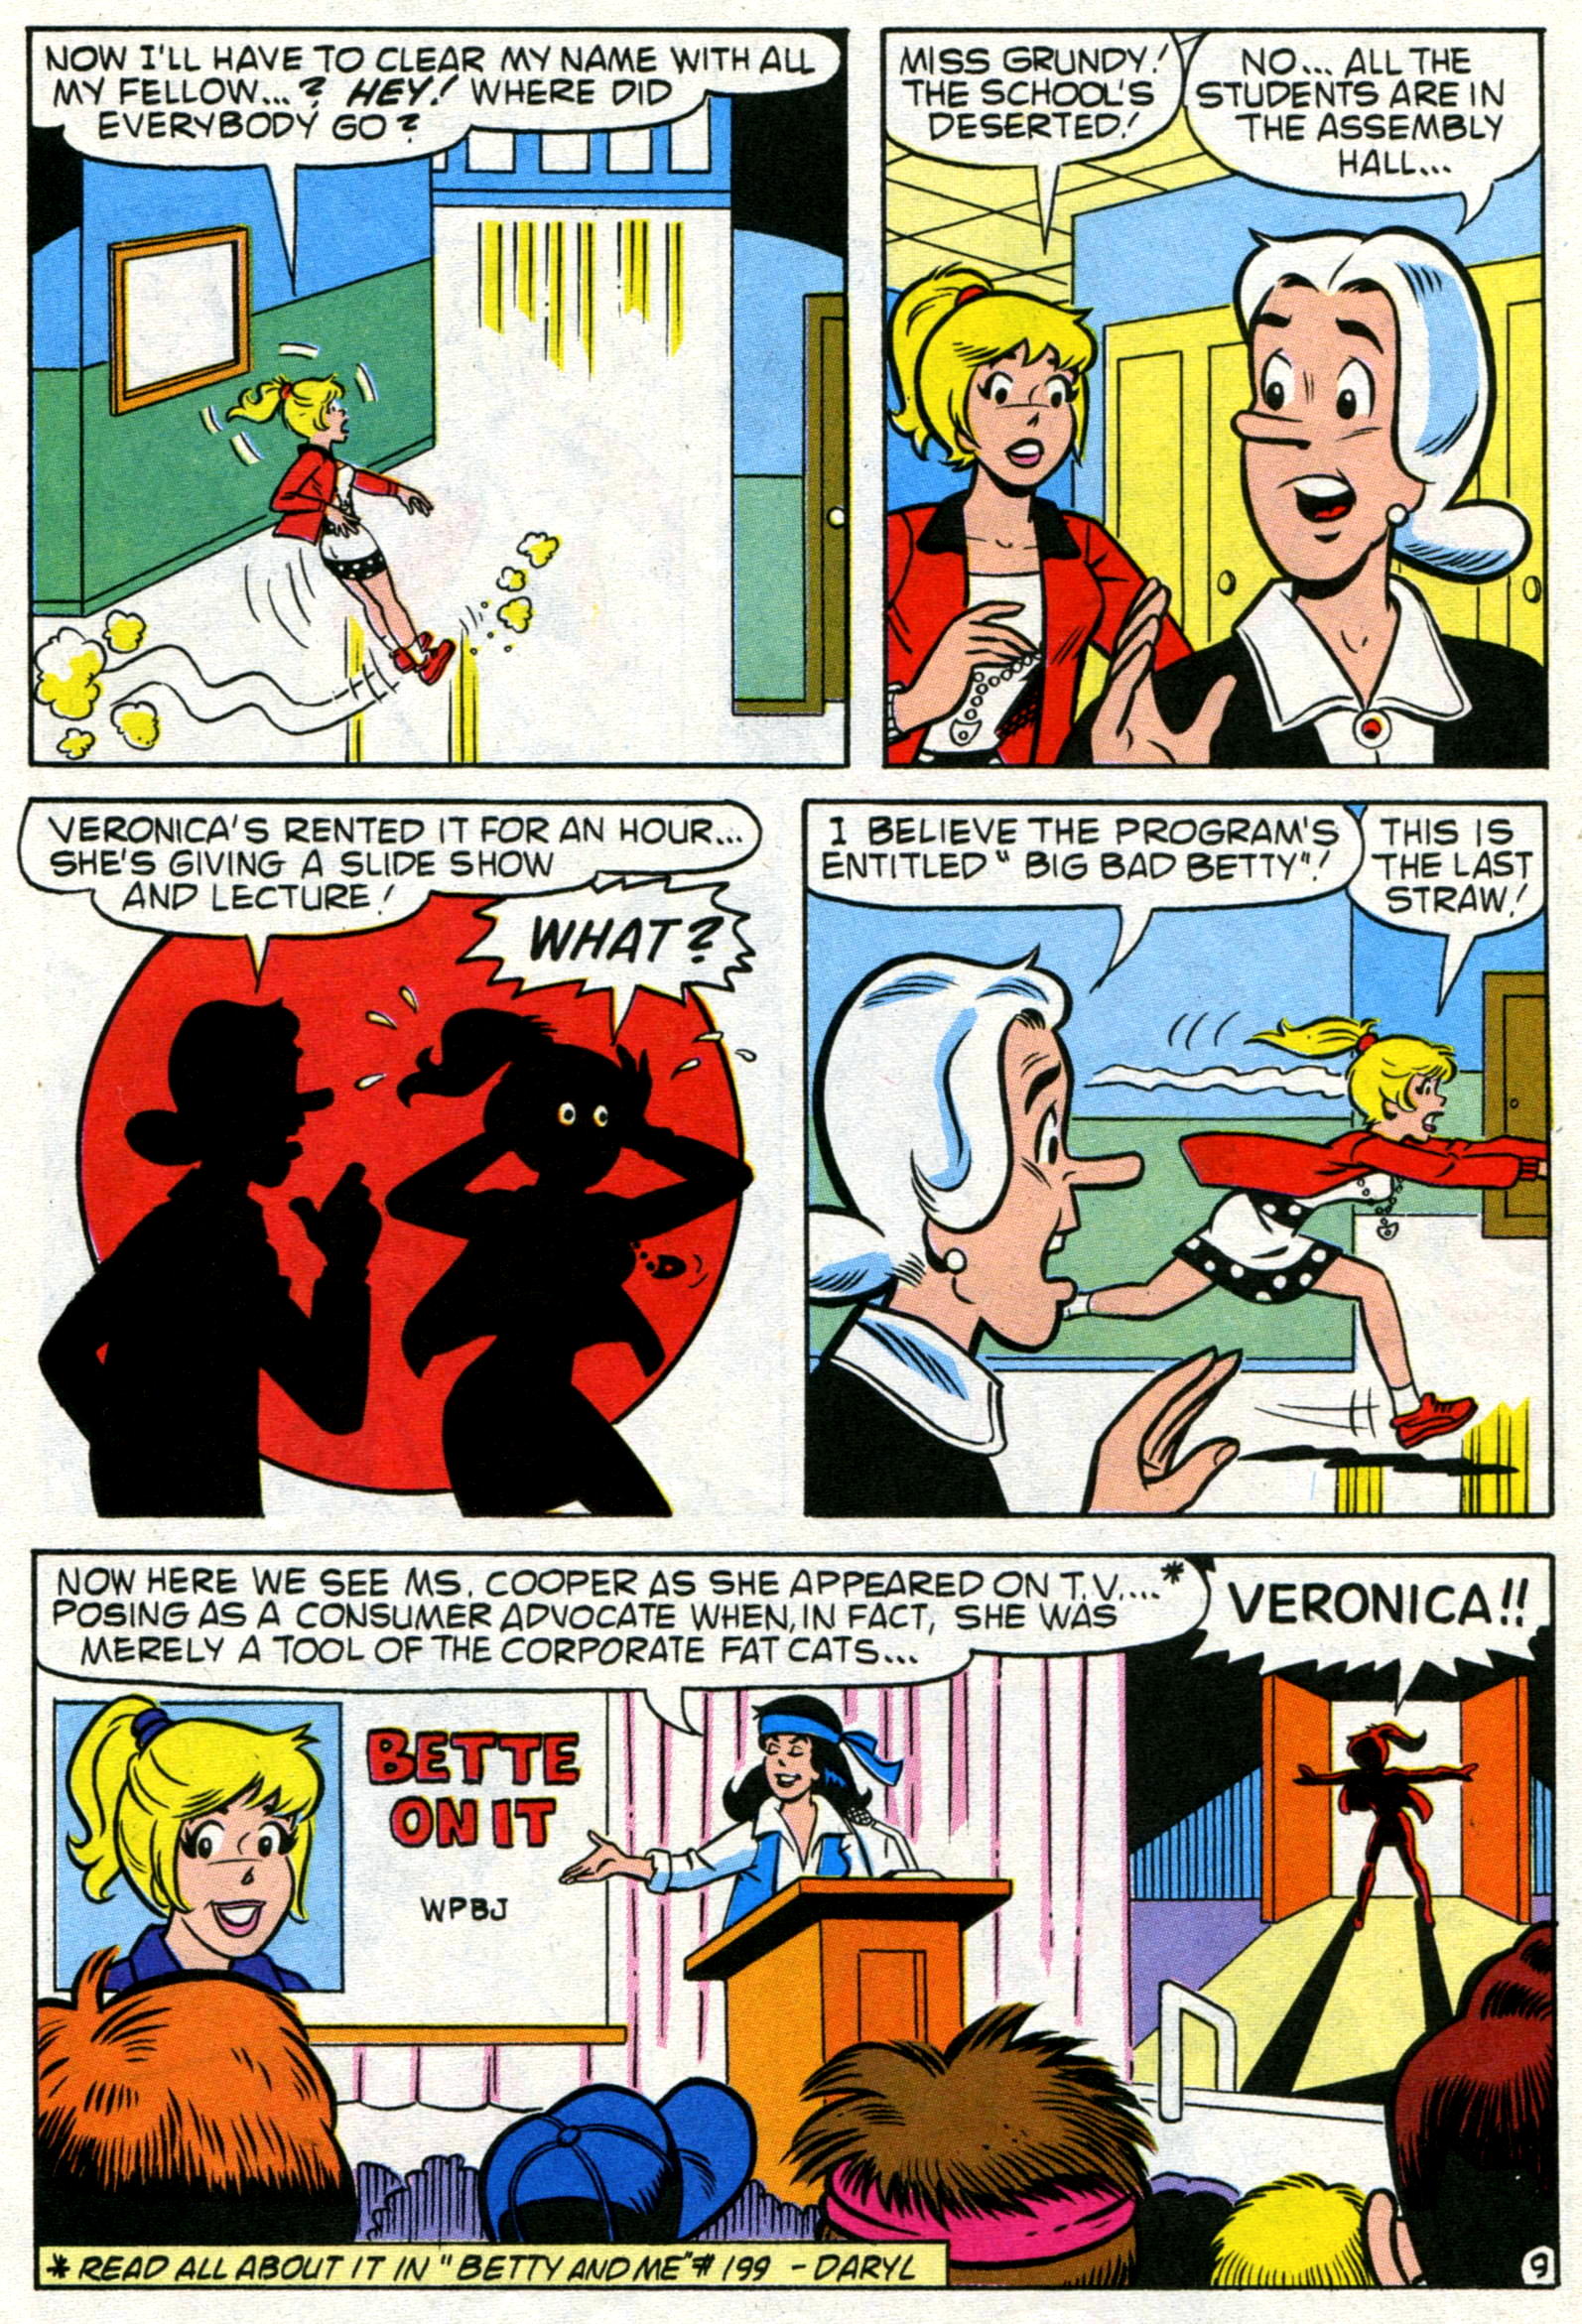 Read online Veronica comic -  Issue #23 - 15